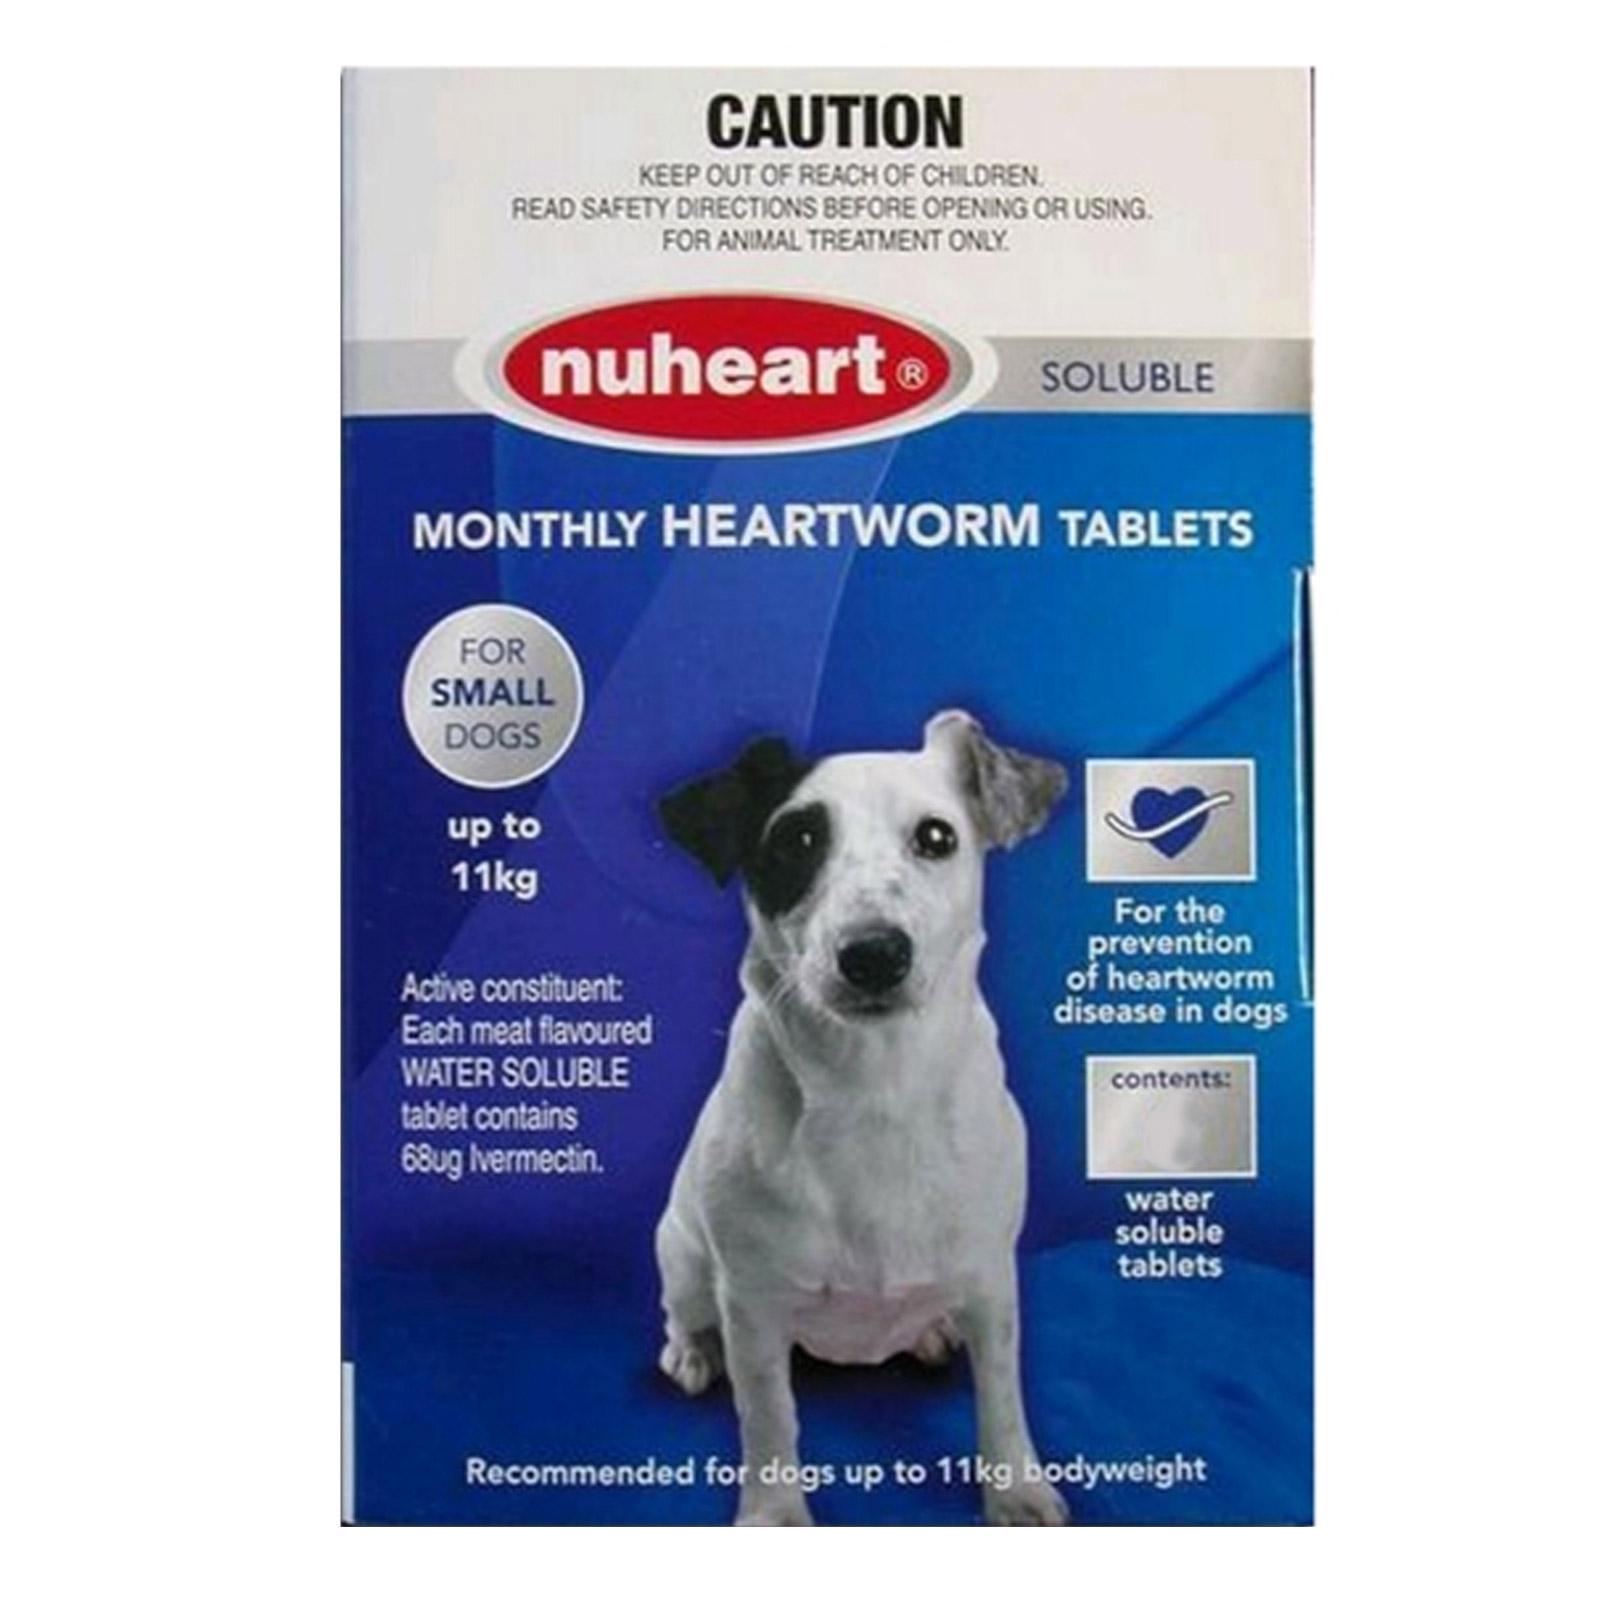 Nuheart Heartworm Tablets for Dogs Nuheart Generic Heartgard for Dogs